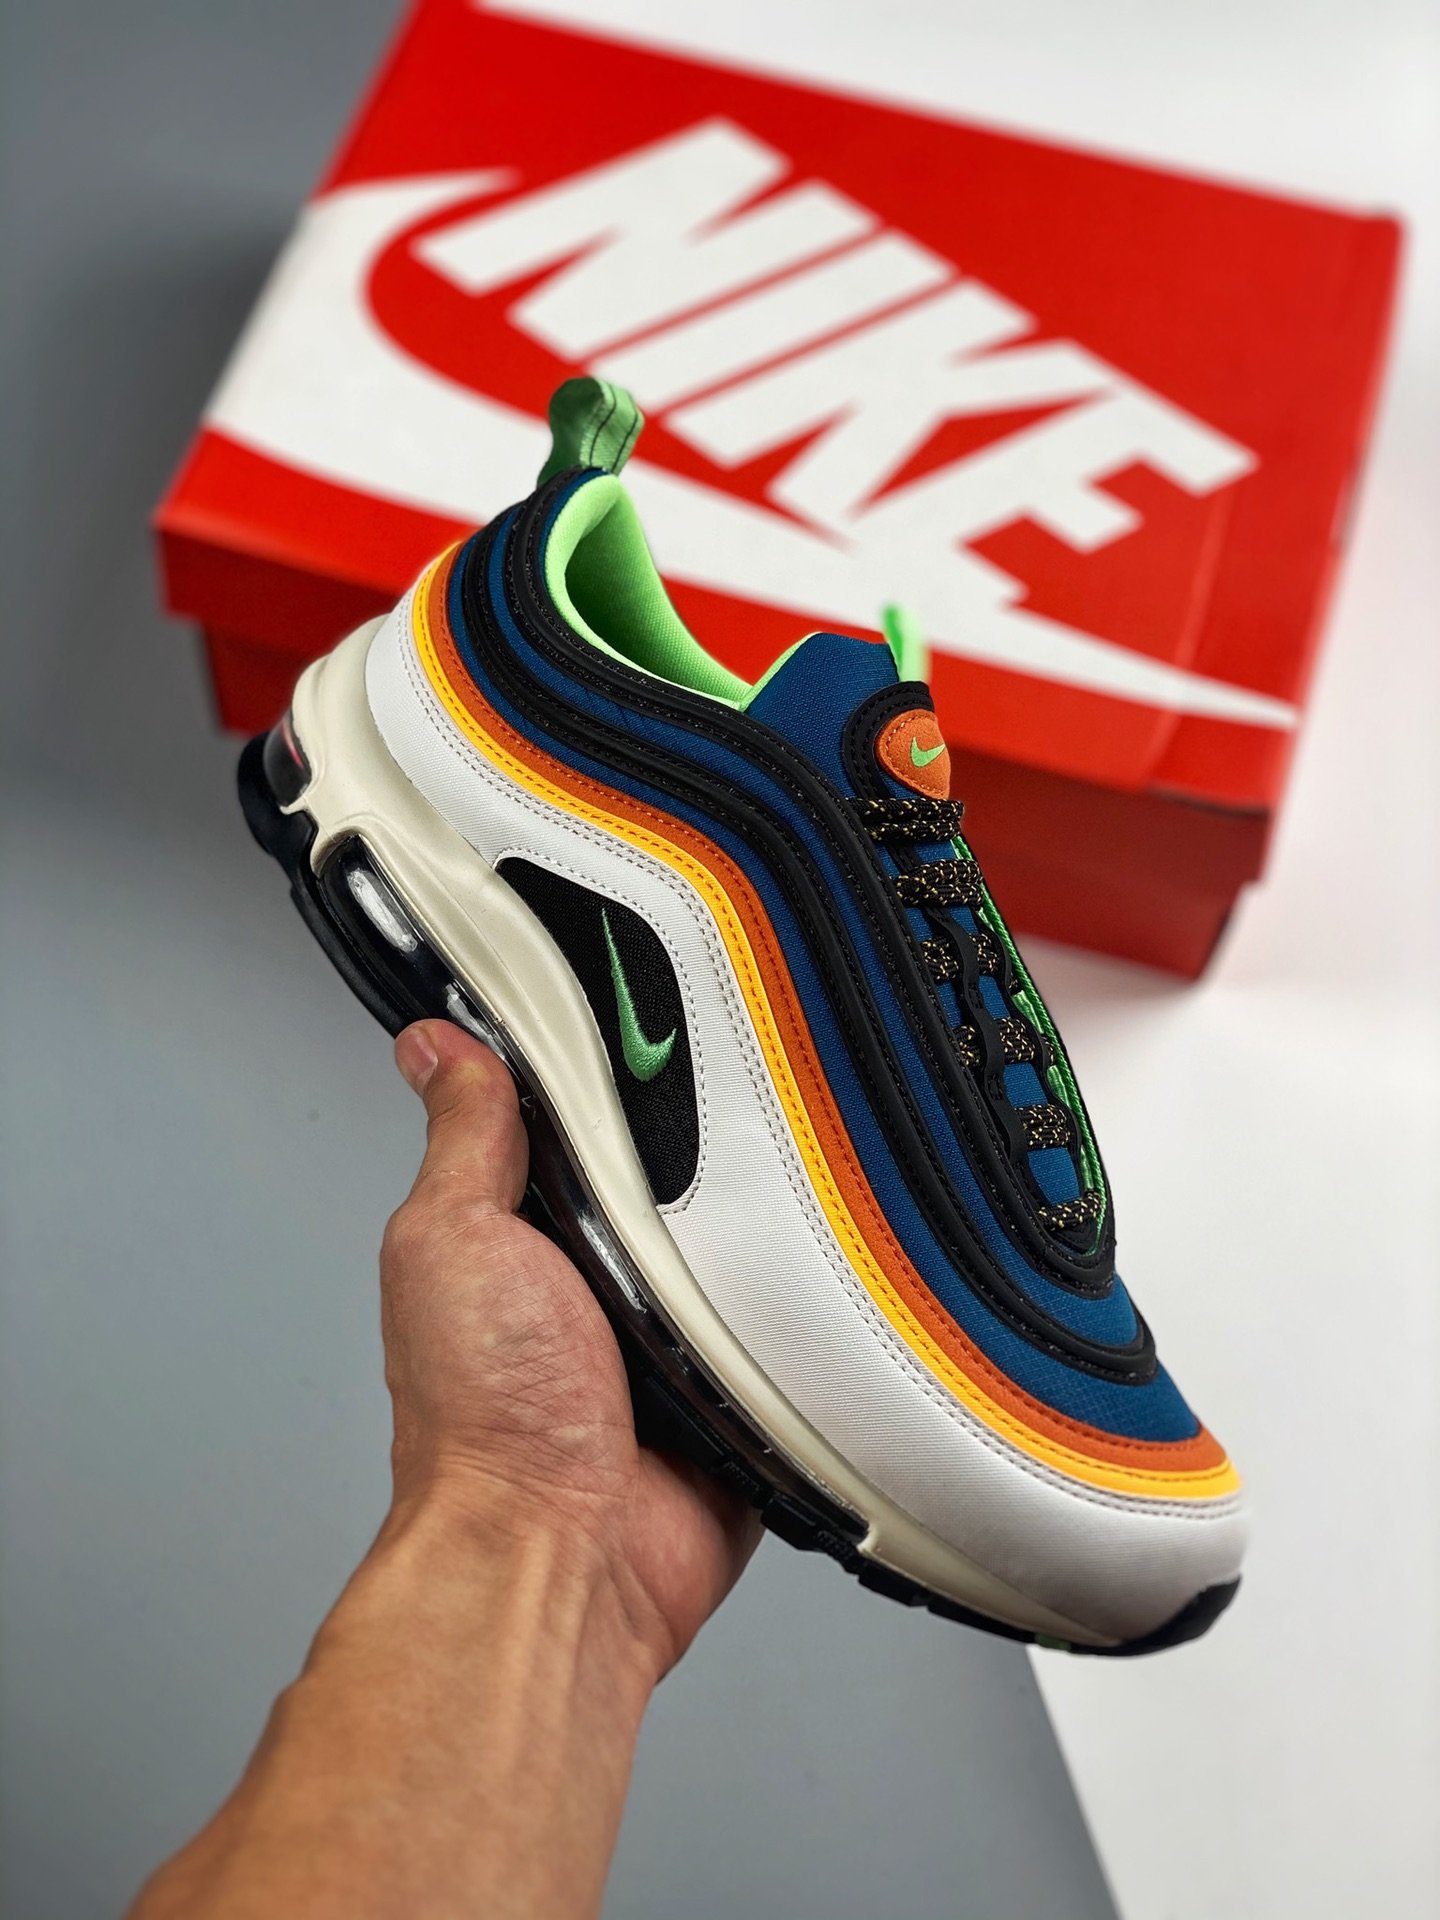 Nike Air Max 97 Green Abyss Illusion Green CZ7868-300 Shoes